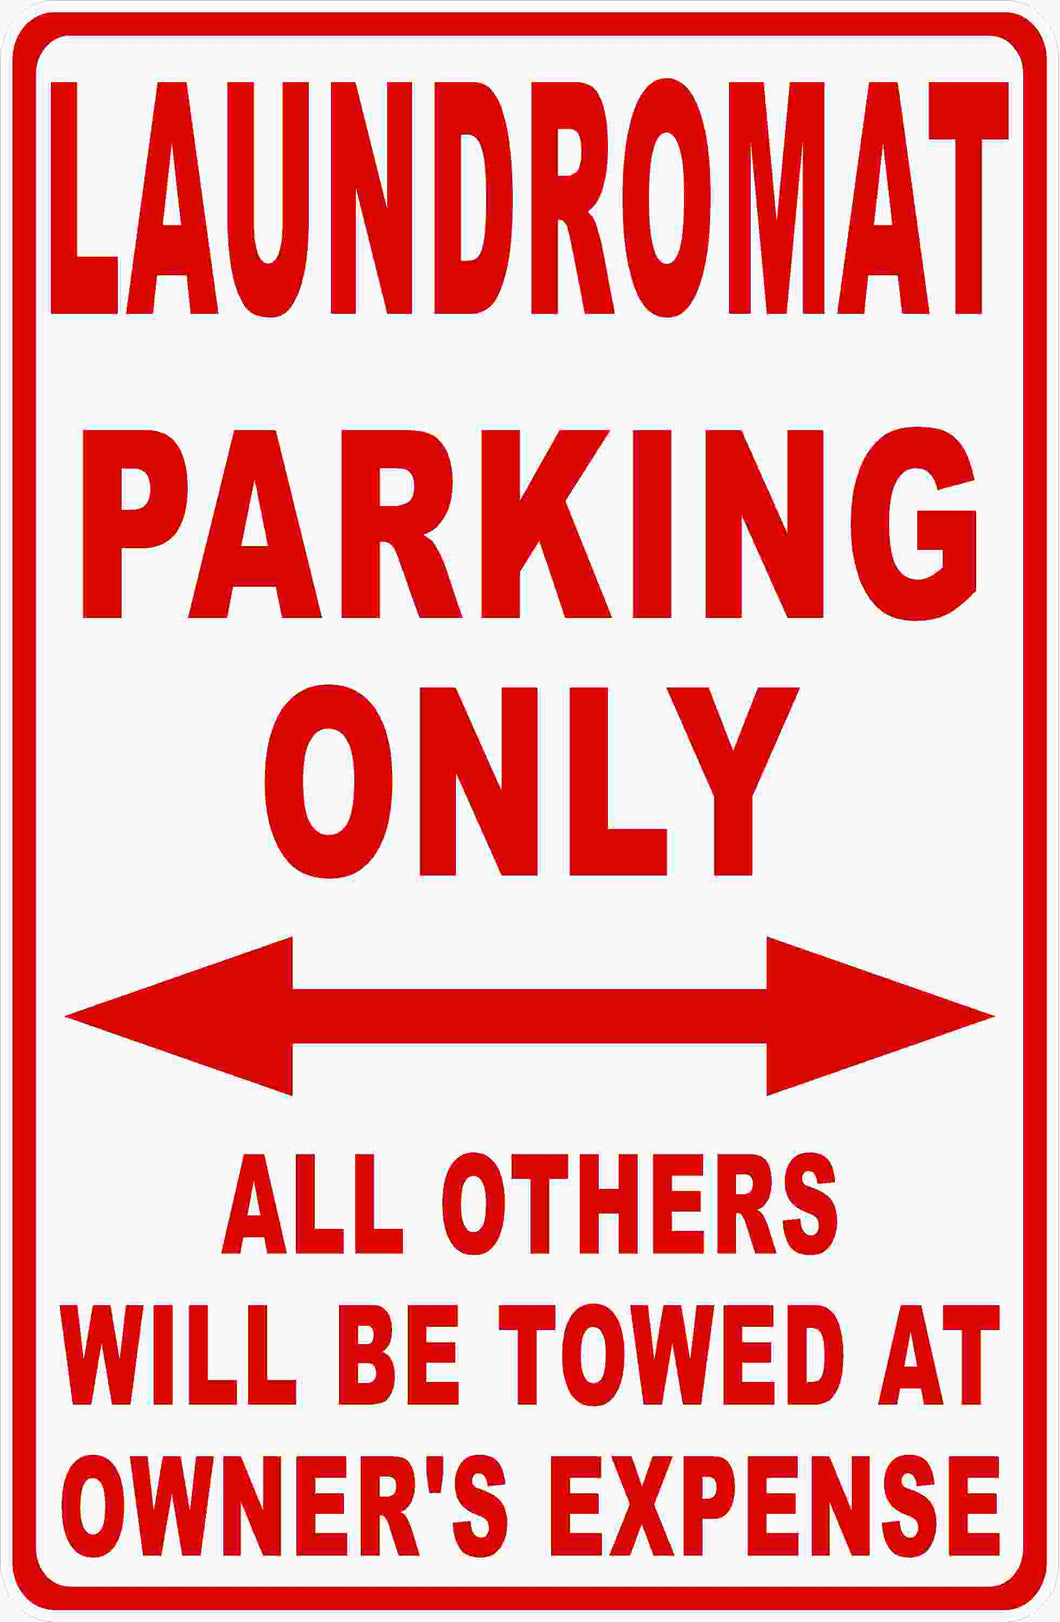 Laundromat Parking Only Sign All Others Towed